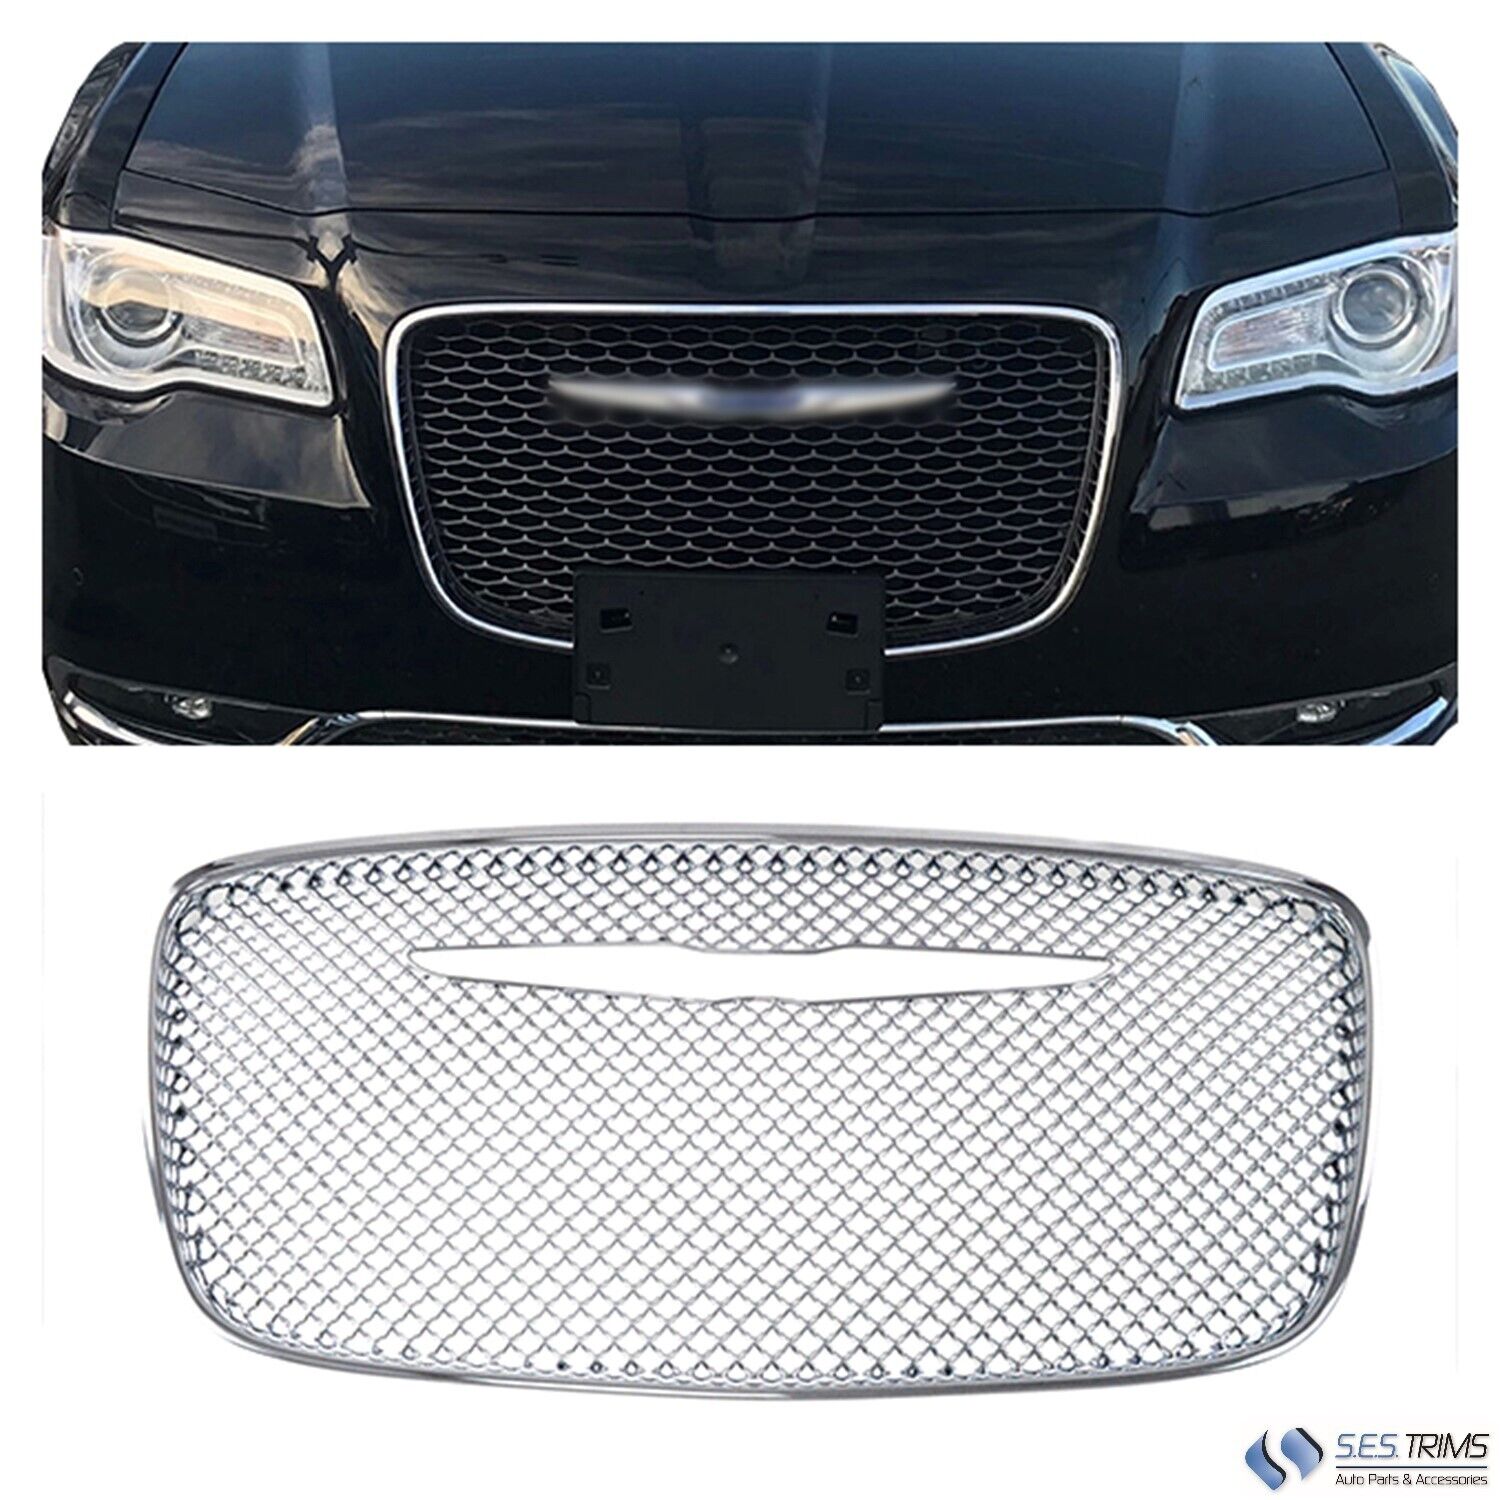 Patented Overlay Chrome Grille fits 15-23 Chrysler 300 C/C Platinum/Limited